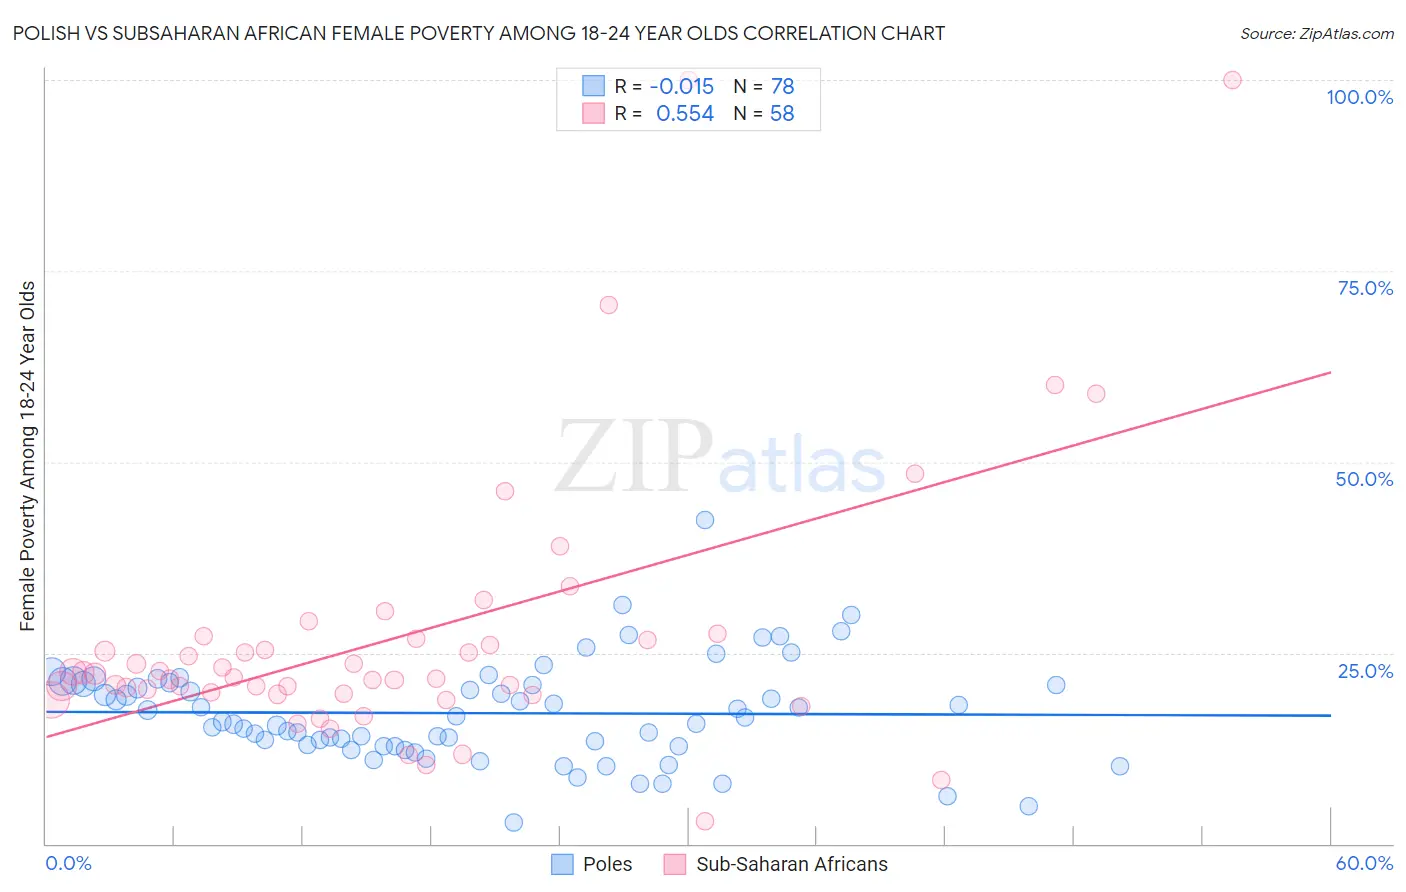 Polish vs Subsaharan African Female Poverty Among 18-24 Year Olds